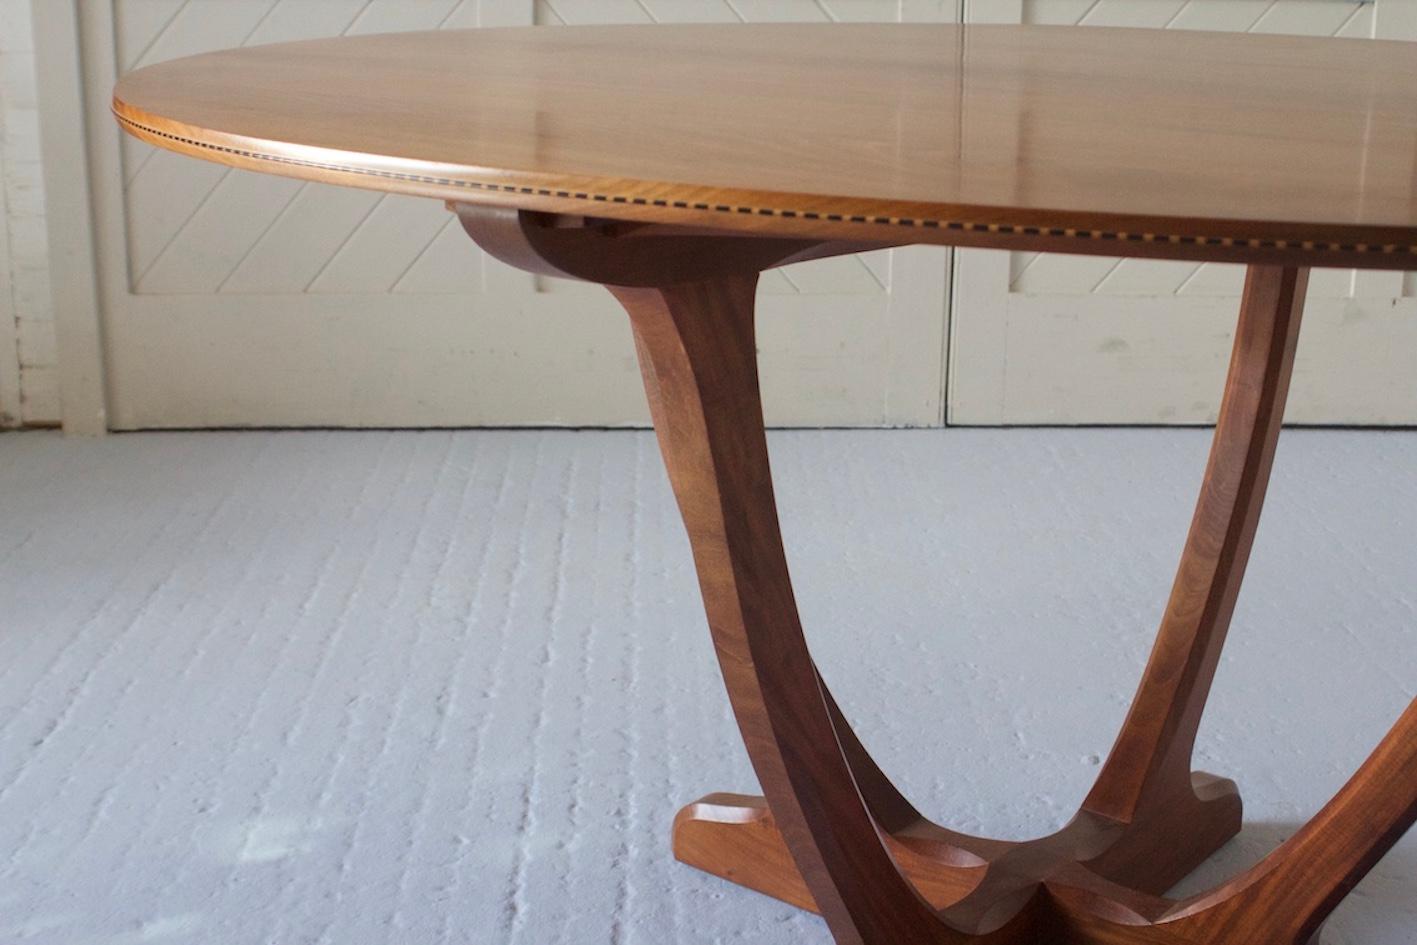 This is a beautifully crafted oval dining table made in the finest Cuban Mahogany with a chequer inlay detailing around the perimeter of the table. The feet have been inset to the underside with boiled holly wood. This design is in order to prevent